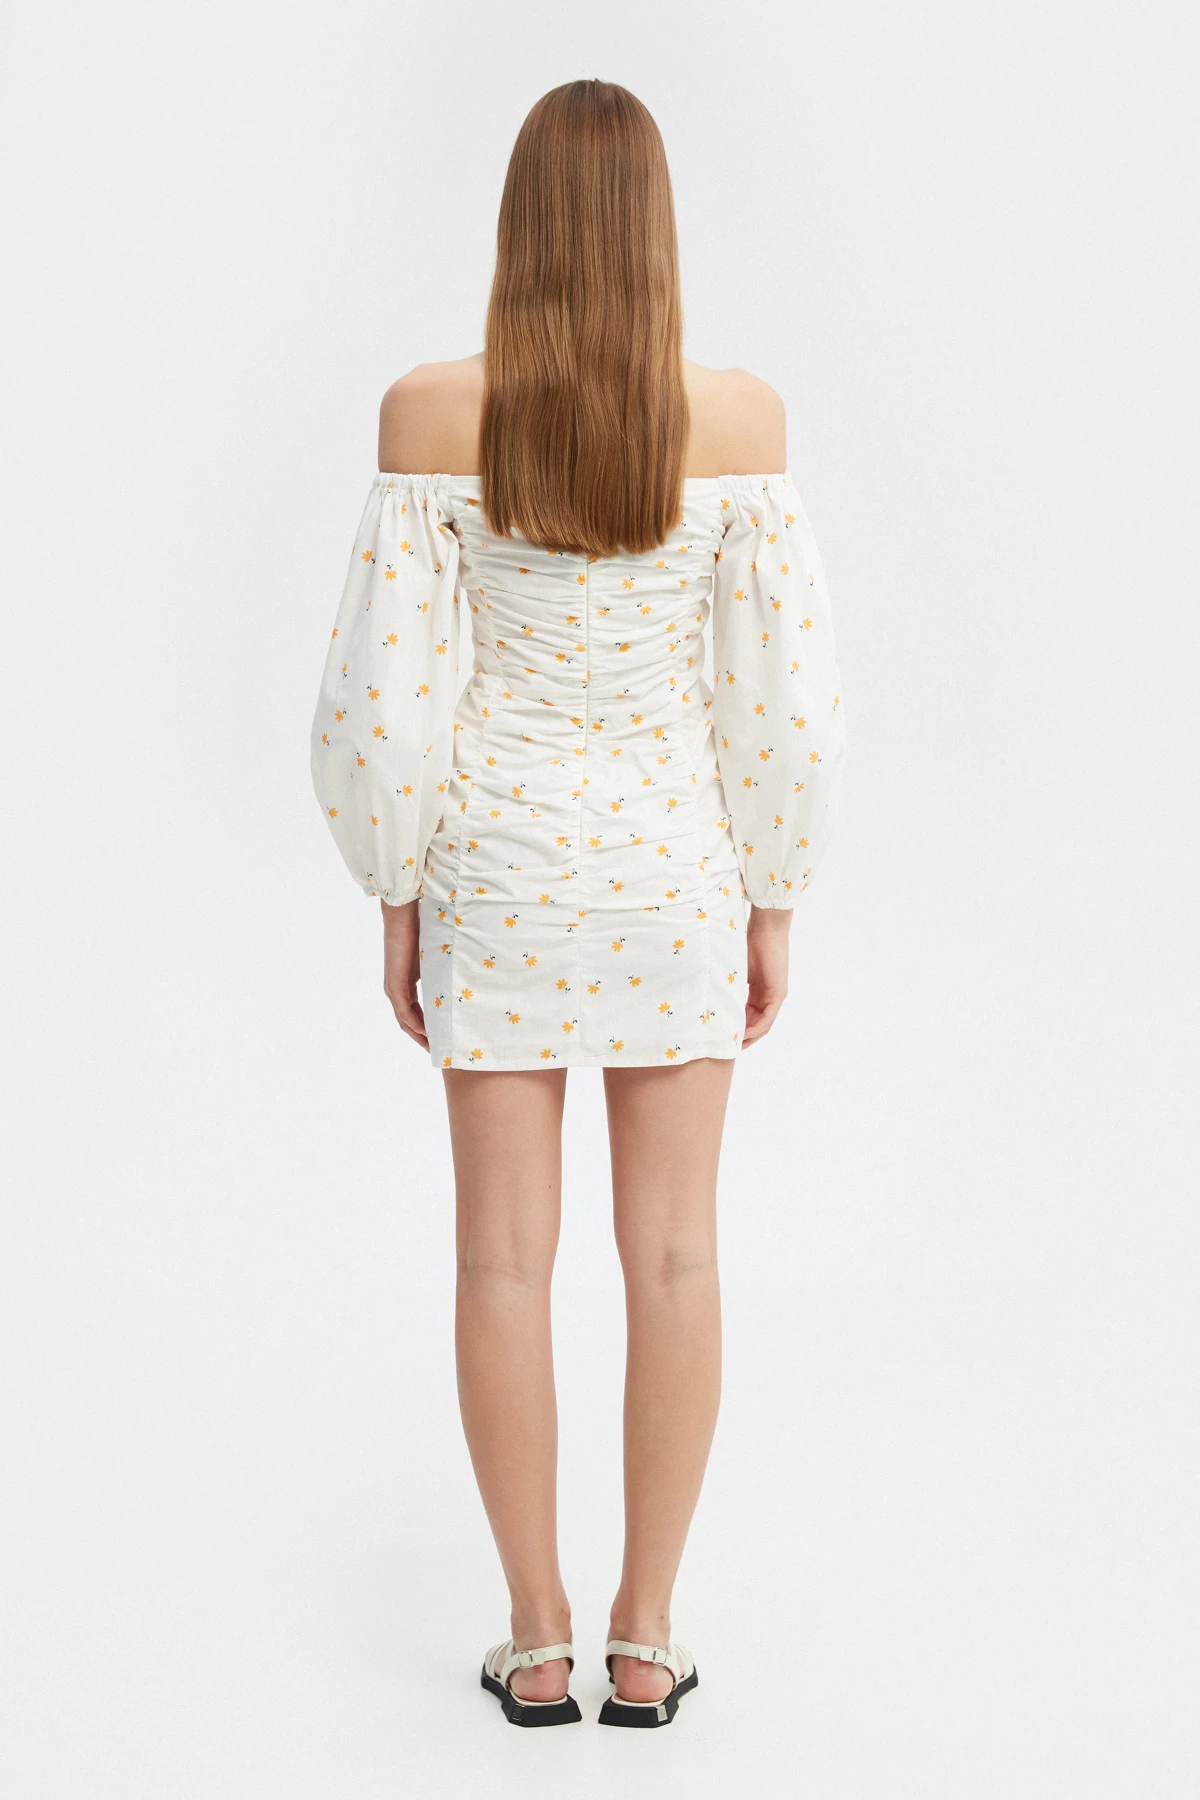 White cotton drapered dress with yellow flowers print, photo 6